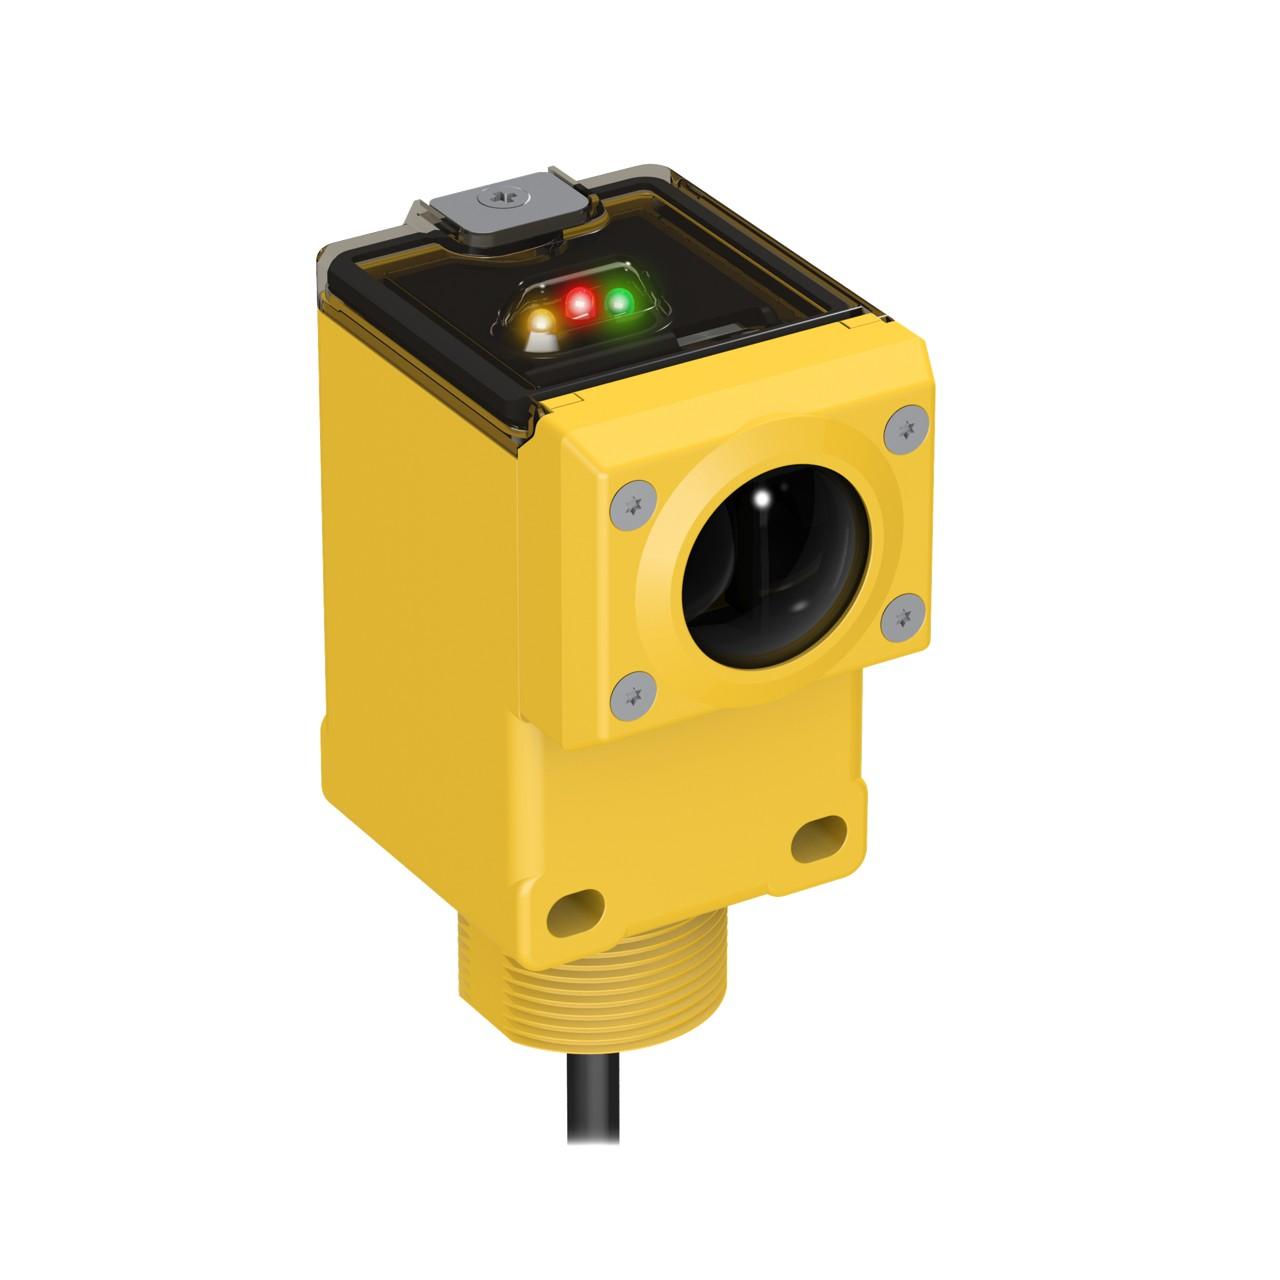 Banner Q45VR3CV Photo-electric sensor with convergent mode - Banner Engineering (Q series - Q45VR3) - Part #53972 - Sensing range 38mm - Visible red light (680nm) - 1 x digital output (SPDT contact type) (Light-ON or Dark-ON operation) - Supply voltage 12Vdc-250Vdc (24Vd